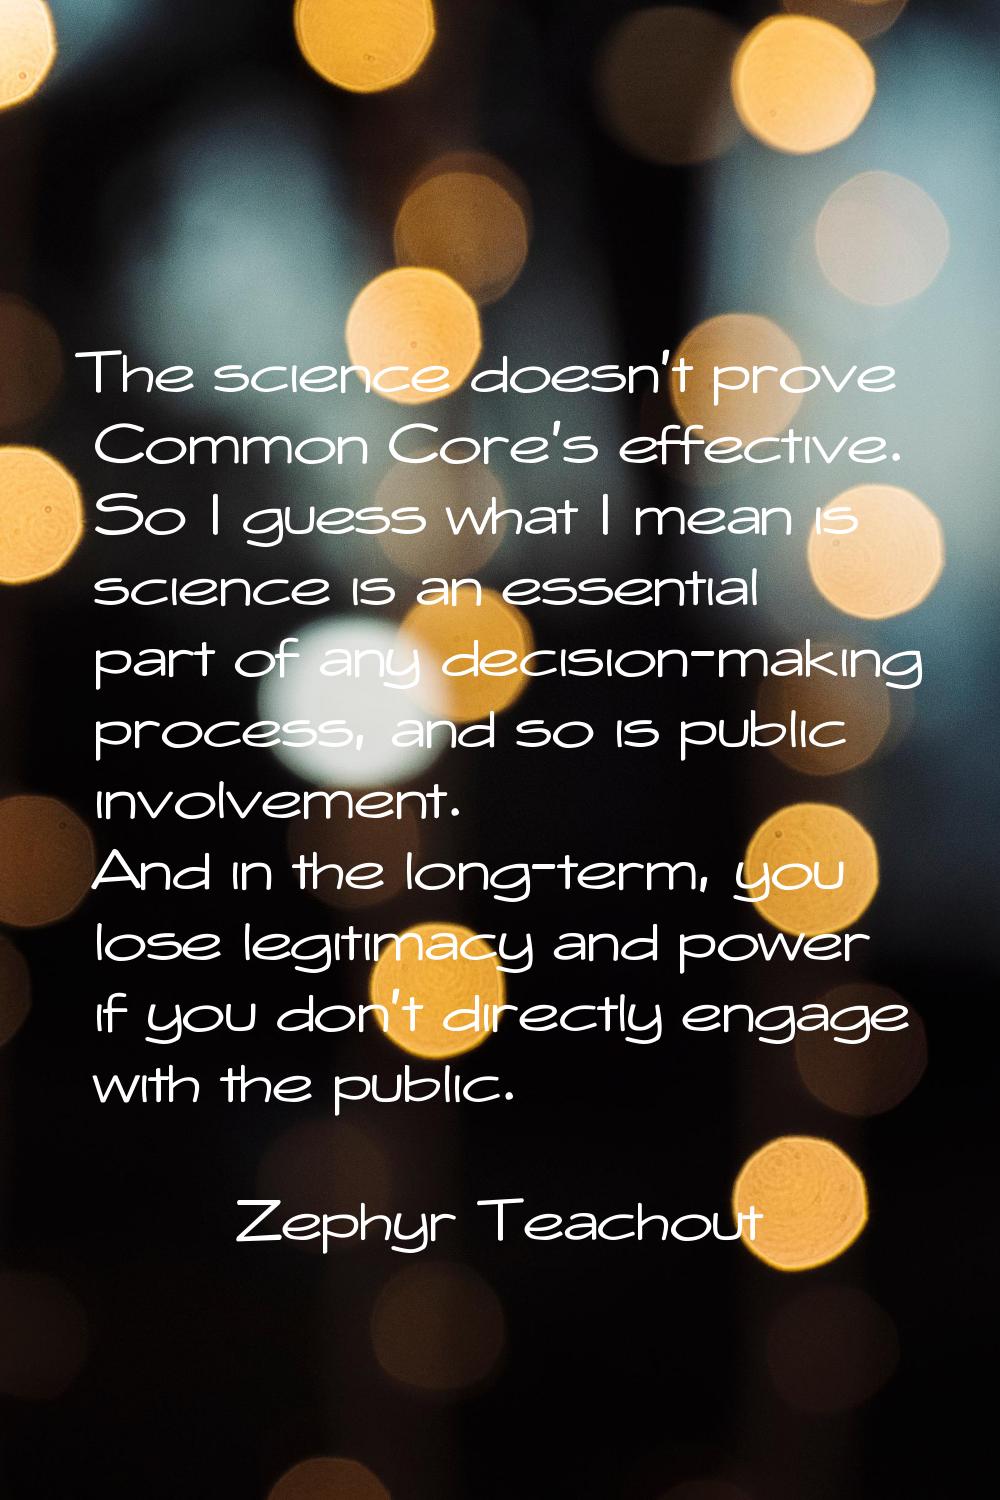 The science doesn't prove Common Core's effective. So I guess what I mean is science is an essentia